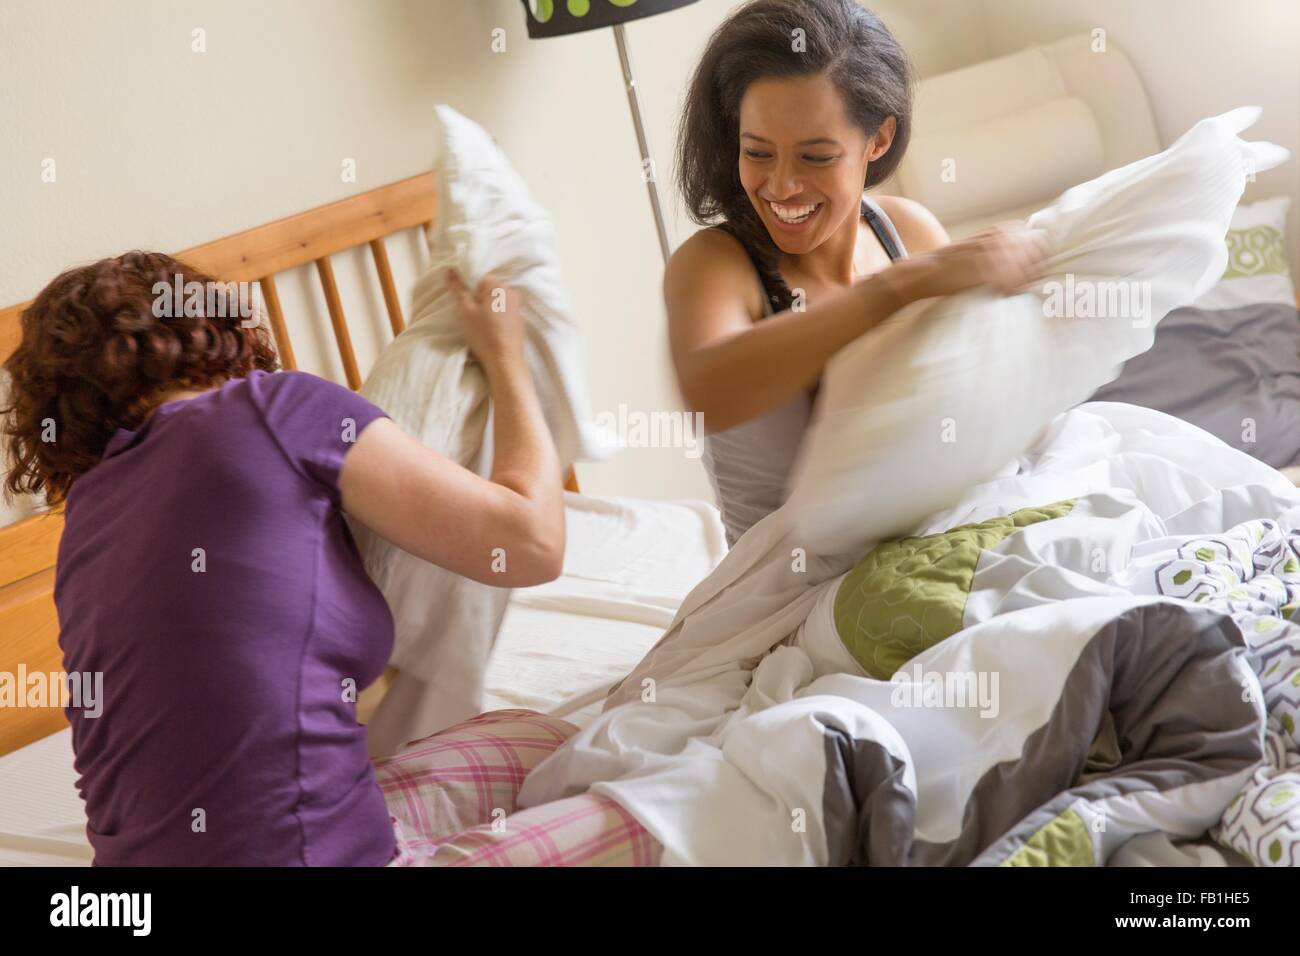 Friends on bed pillow fighting smiling Stock Photo